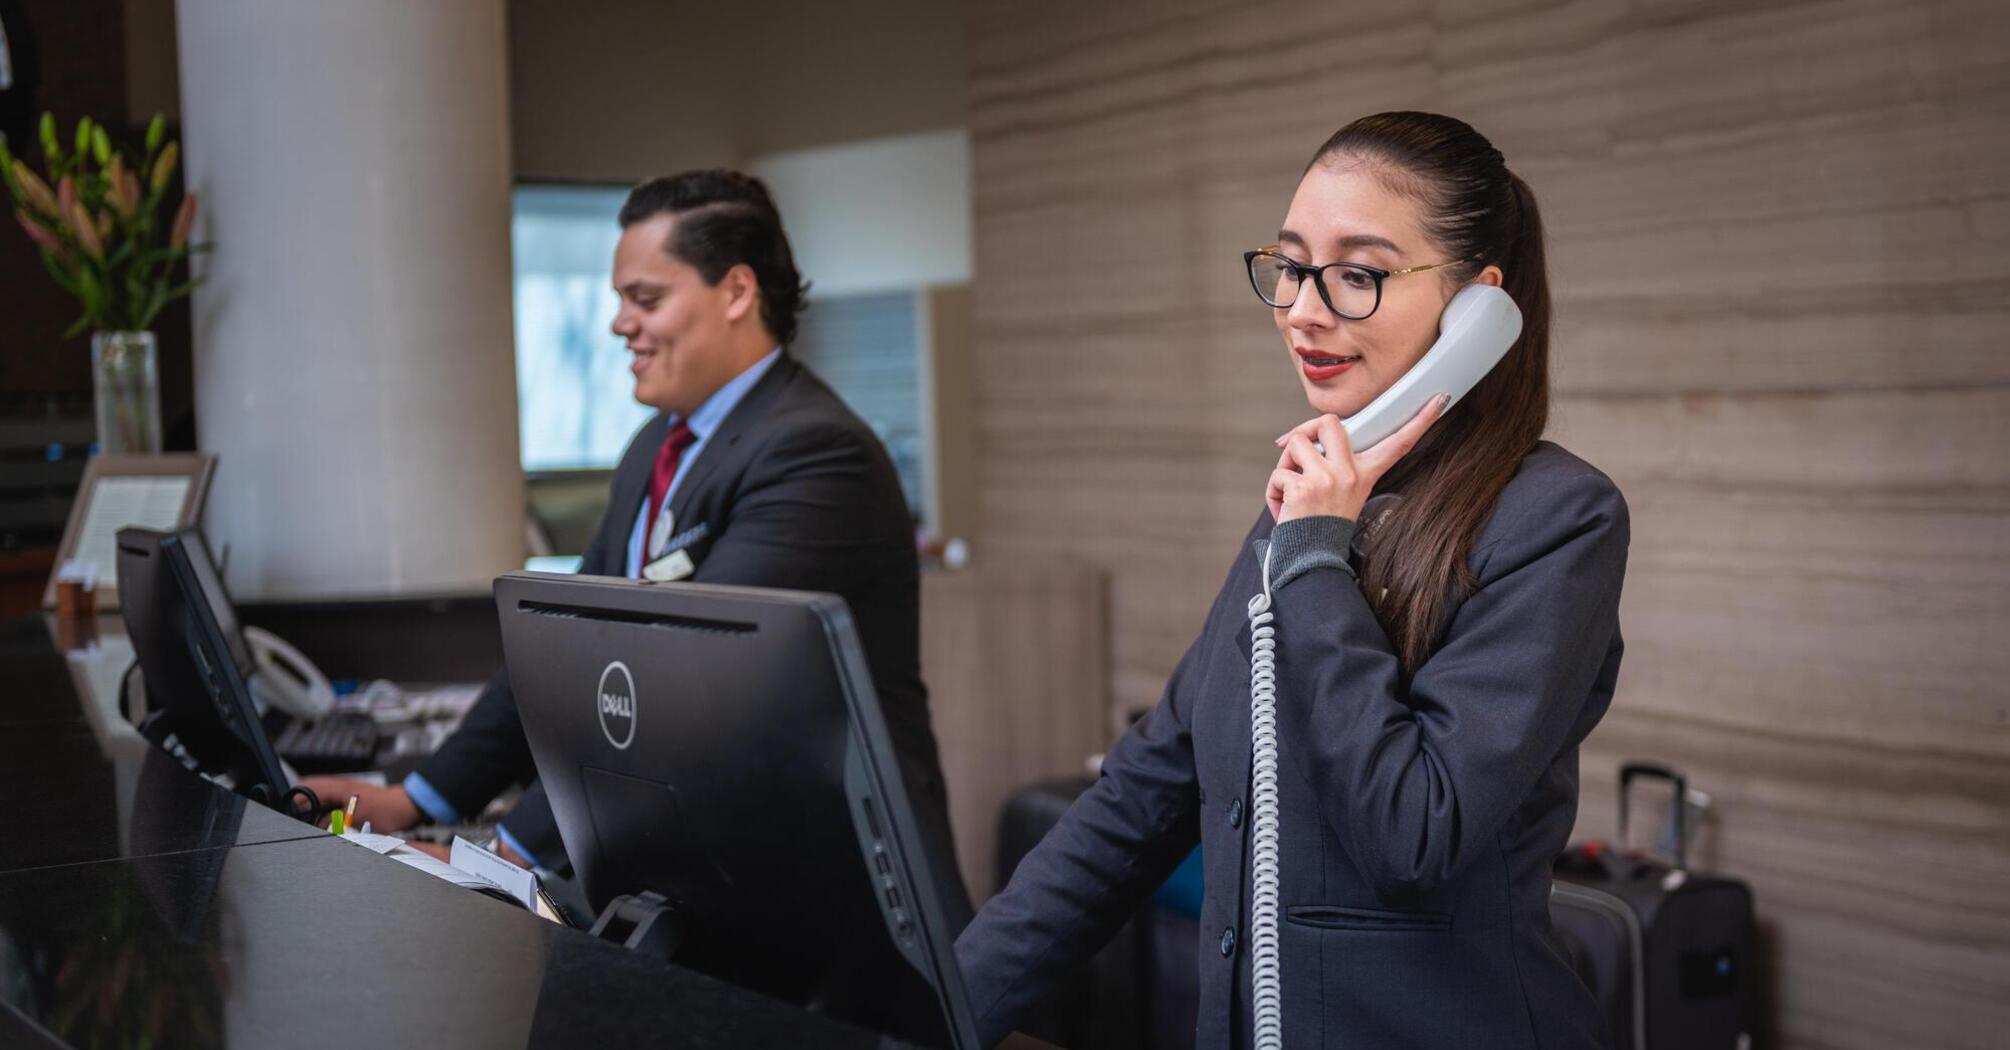 The hotel staff works at the front desk, handling reservations, and interacting with guests